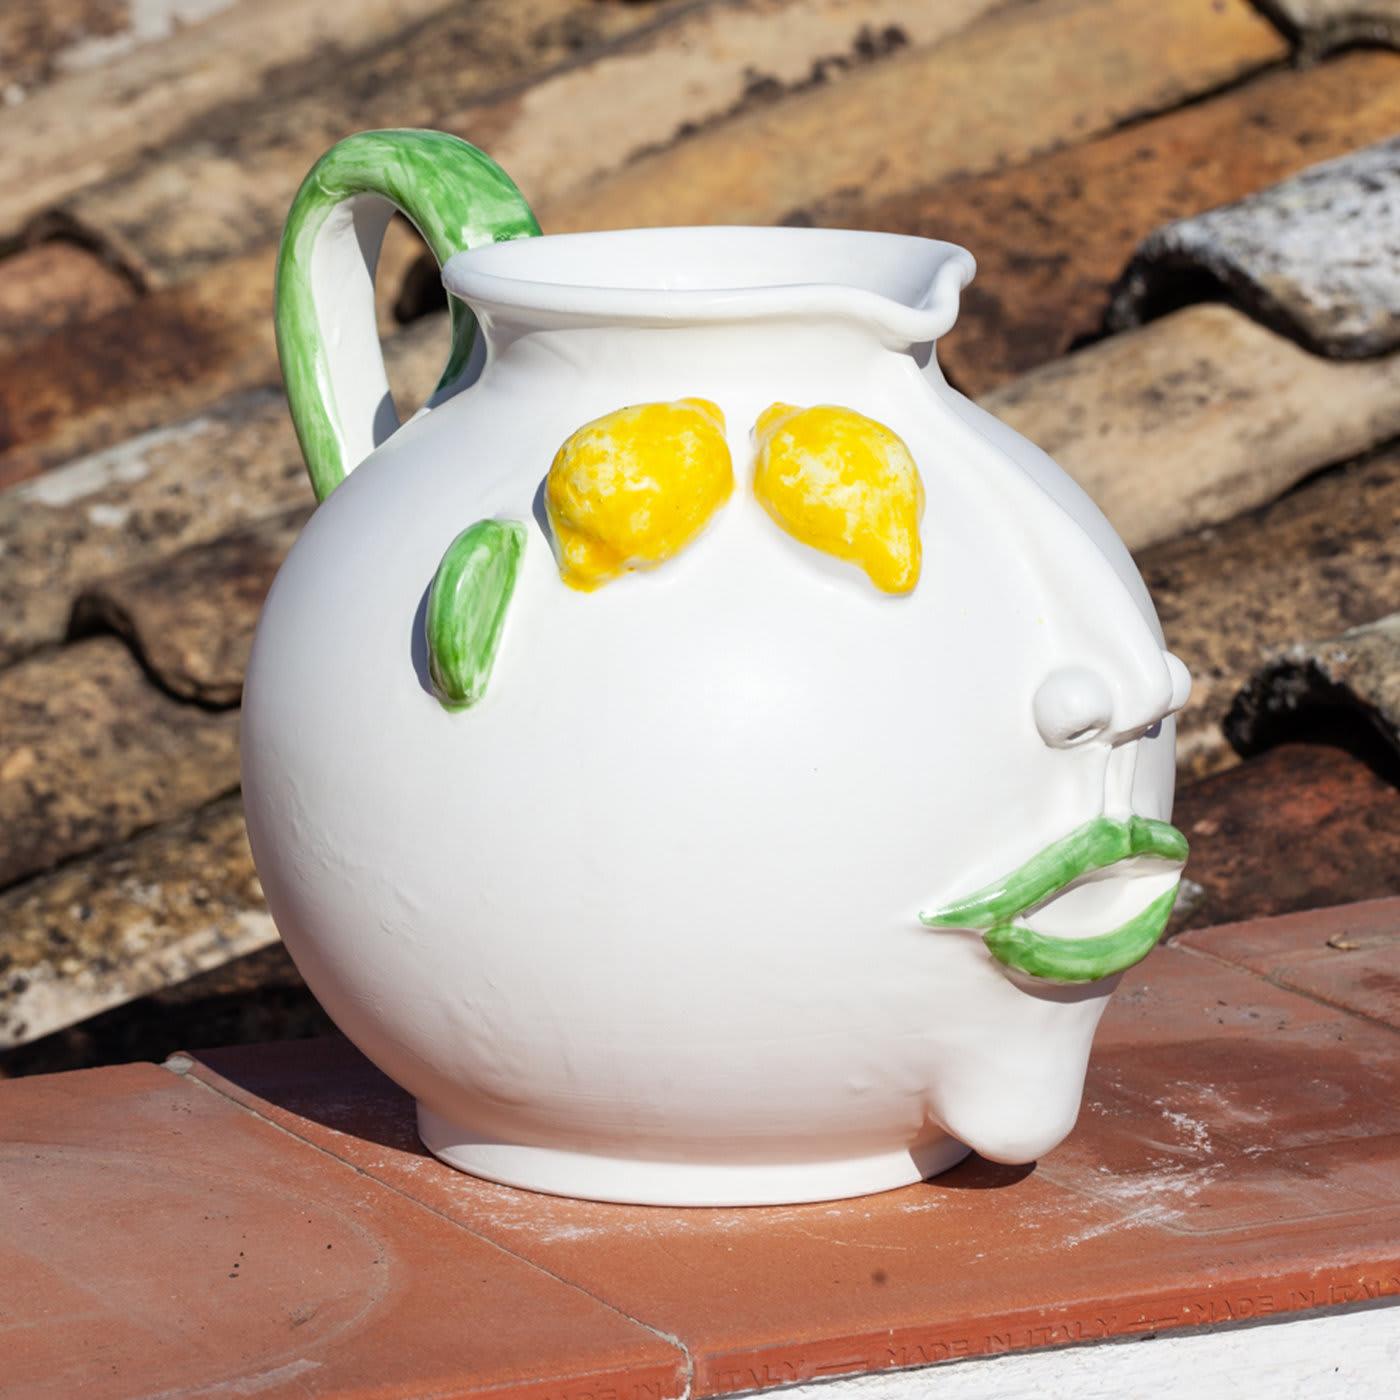 Filomena, a Sicilian female steet vendor of lemons, inspired master ceramist Patrizia Italian to handcraft this stylish anthropomorphic pitcher in ivory-glazed ceramic with a matt finish. The nose and chin are superbly rendered in their dramatic